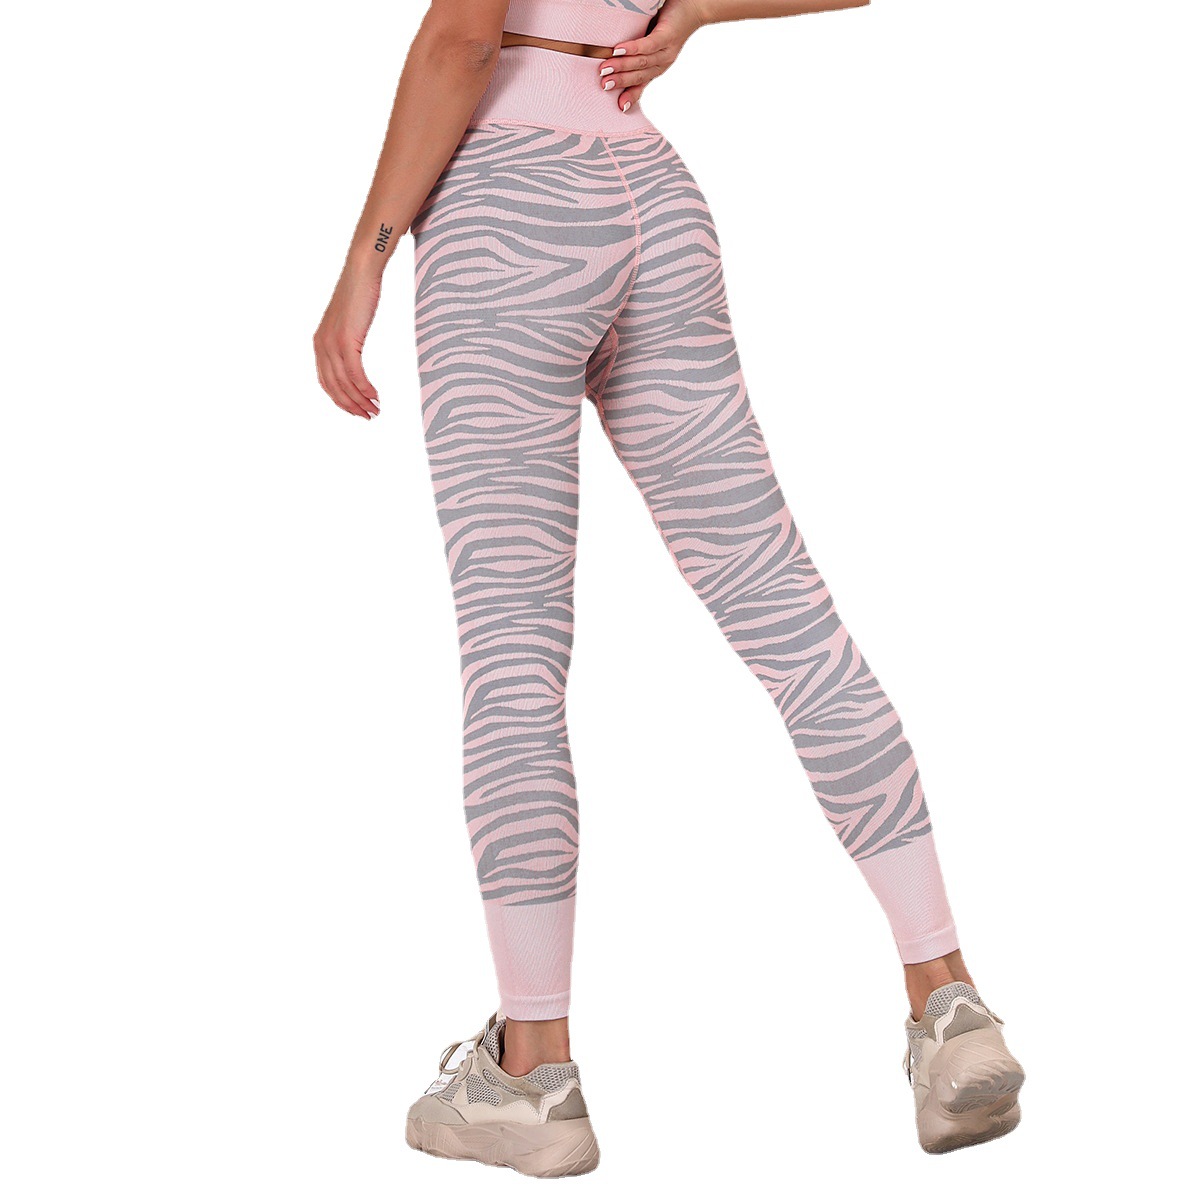 Wholesale Seamless Stripe Colorblock Yoga Pants: Stay Ahead in the Global Fitness Market | ZHIHUI Featured Image